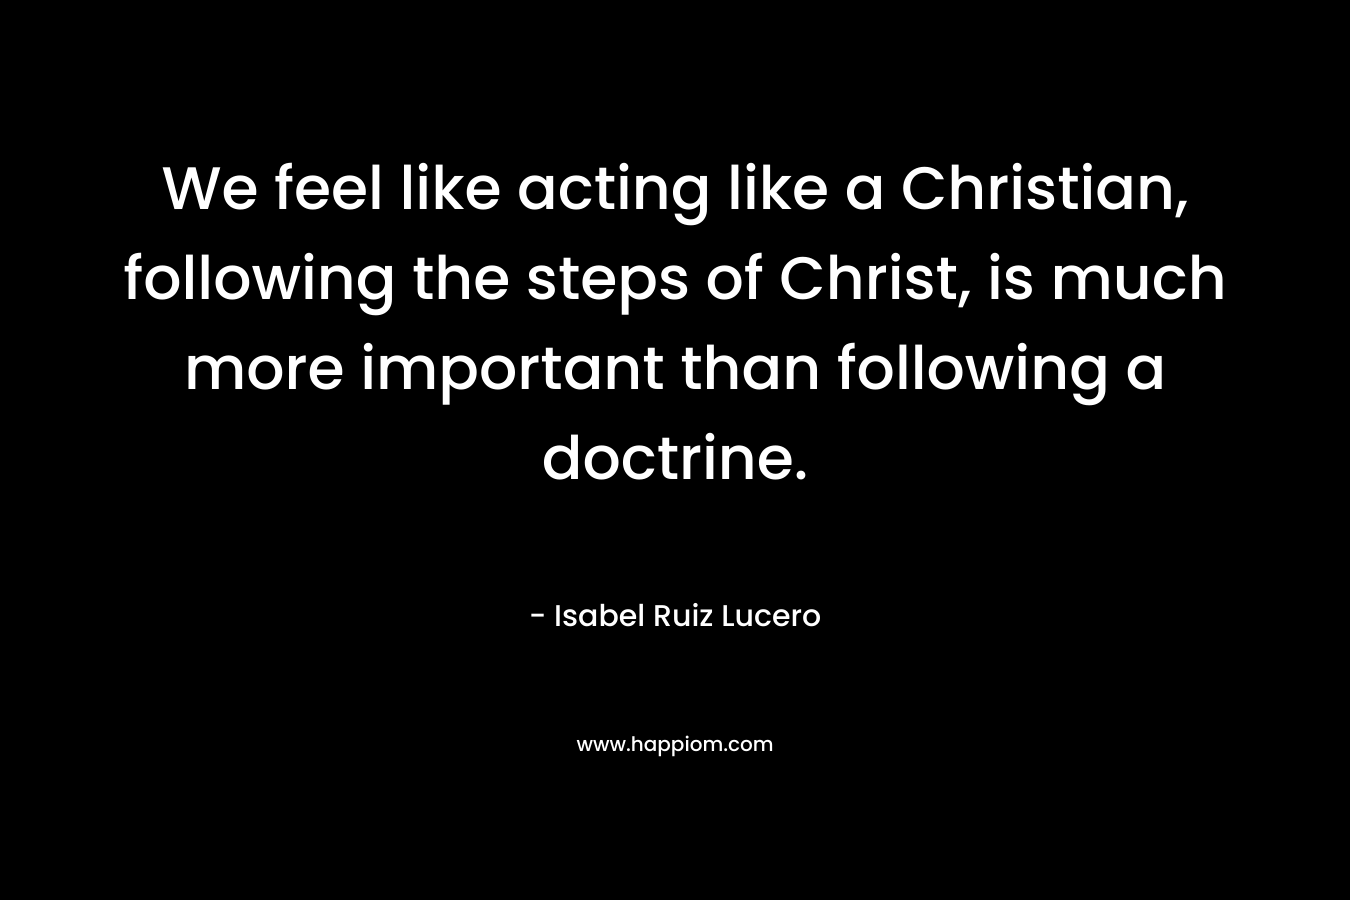 We feel like acting like a Christian, following the steps of Christ, is much more important than following a doctrine.